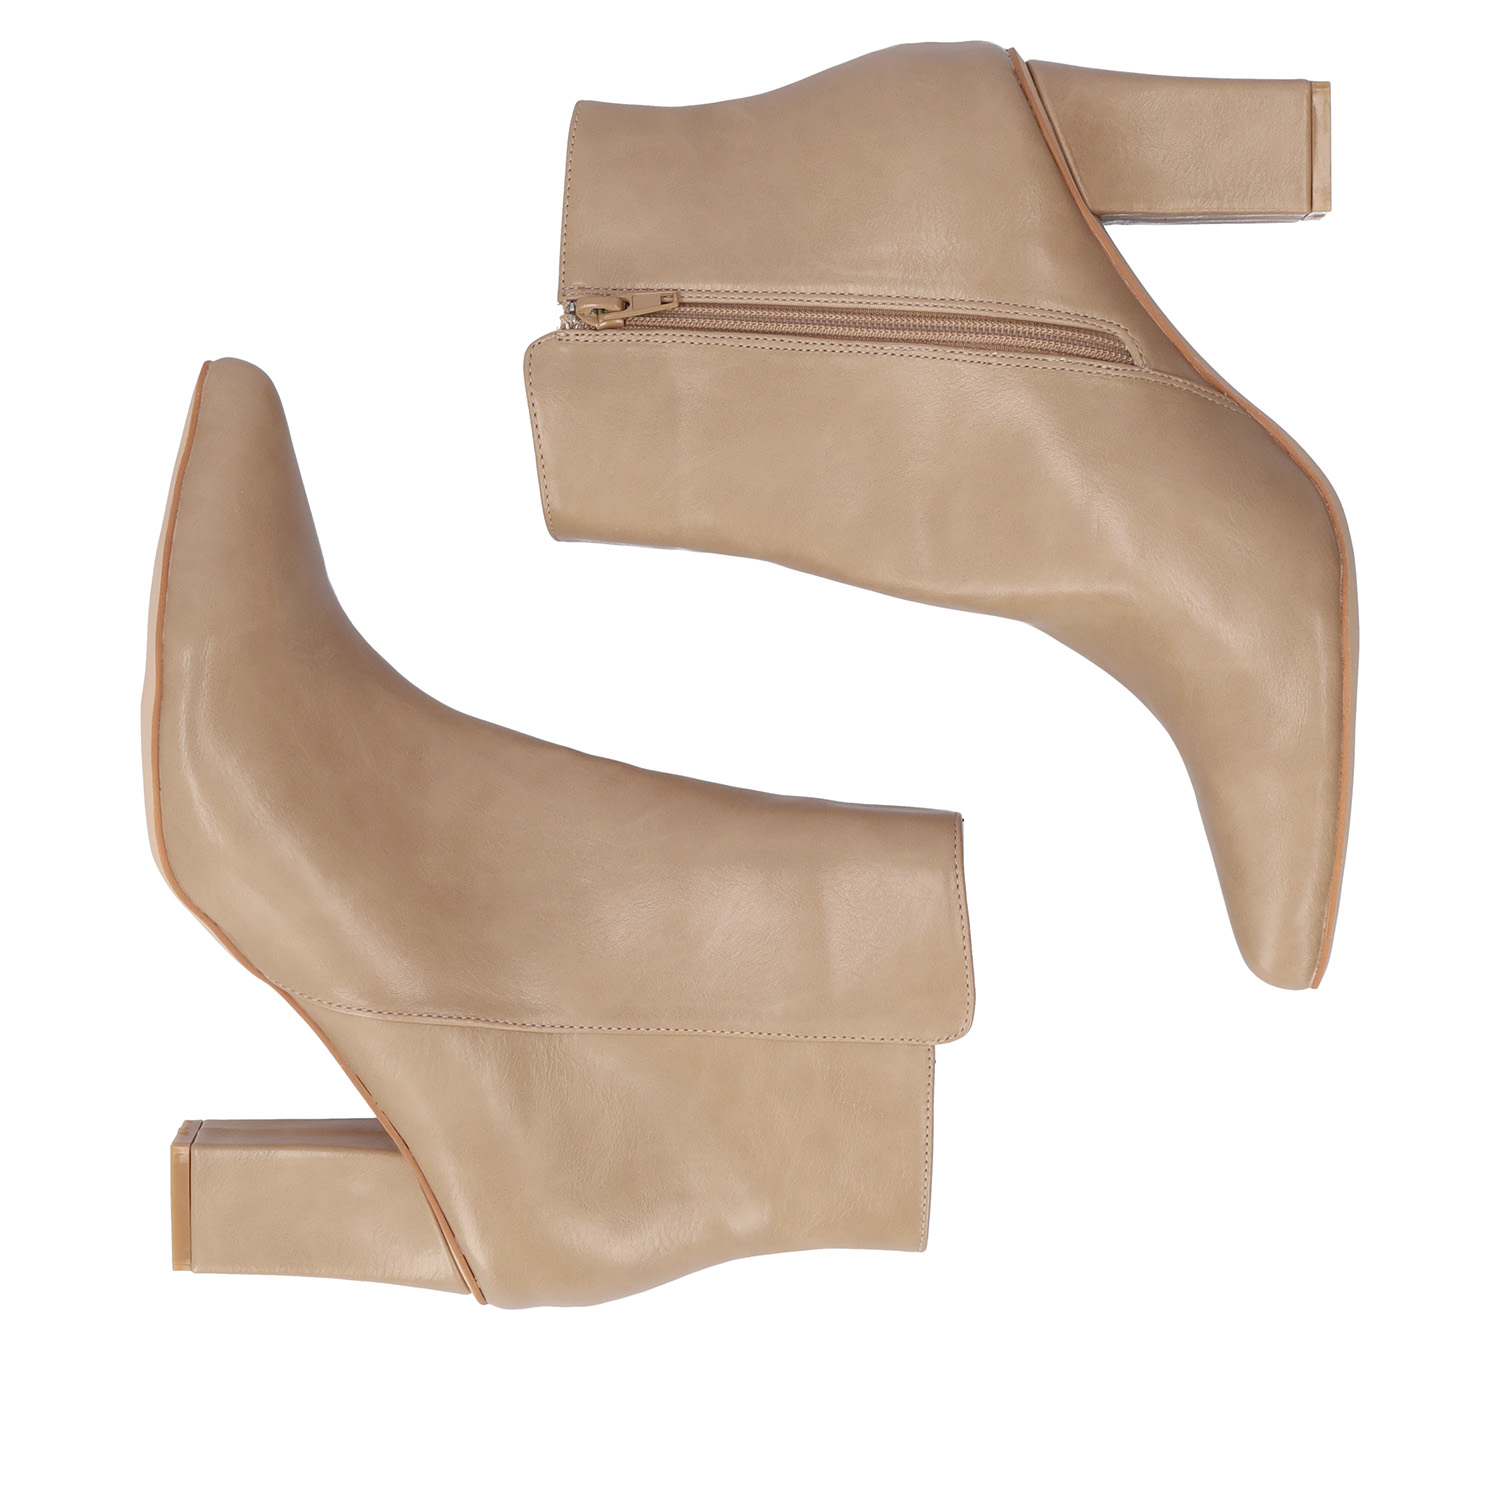 Heeled booties in beige faux leather. 